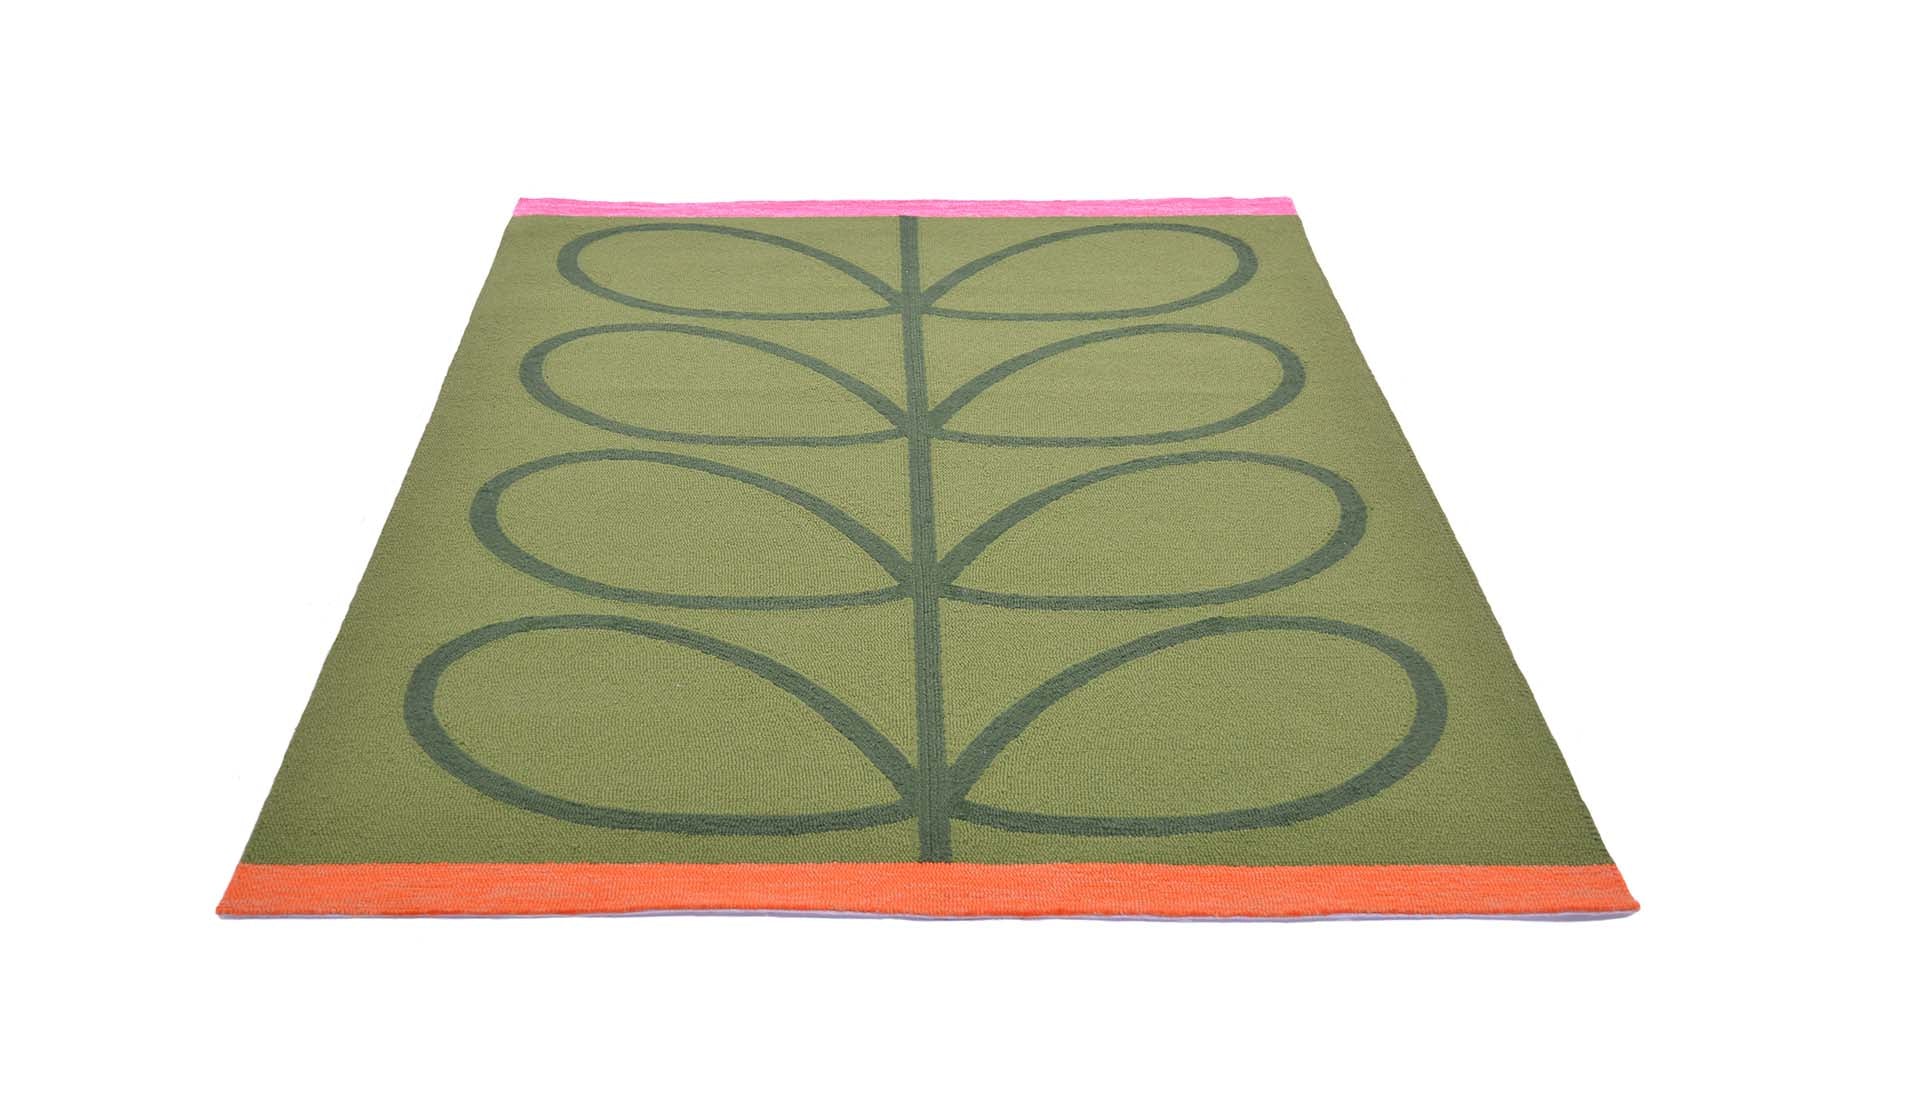 green indoor/outdoor rug with oversized floral print
